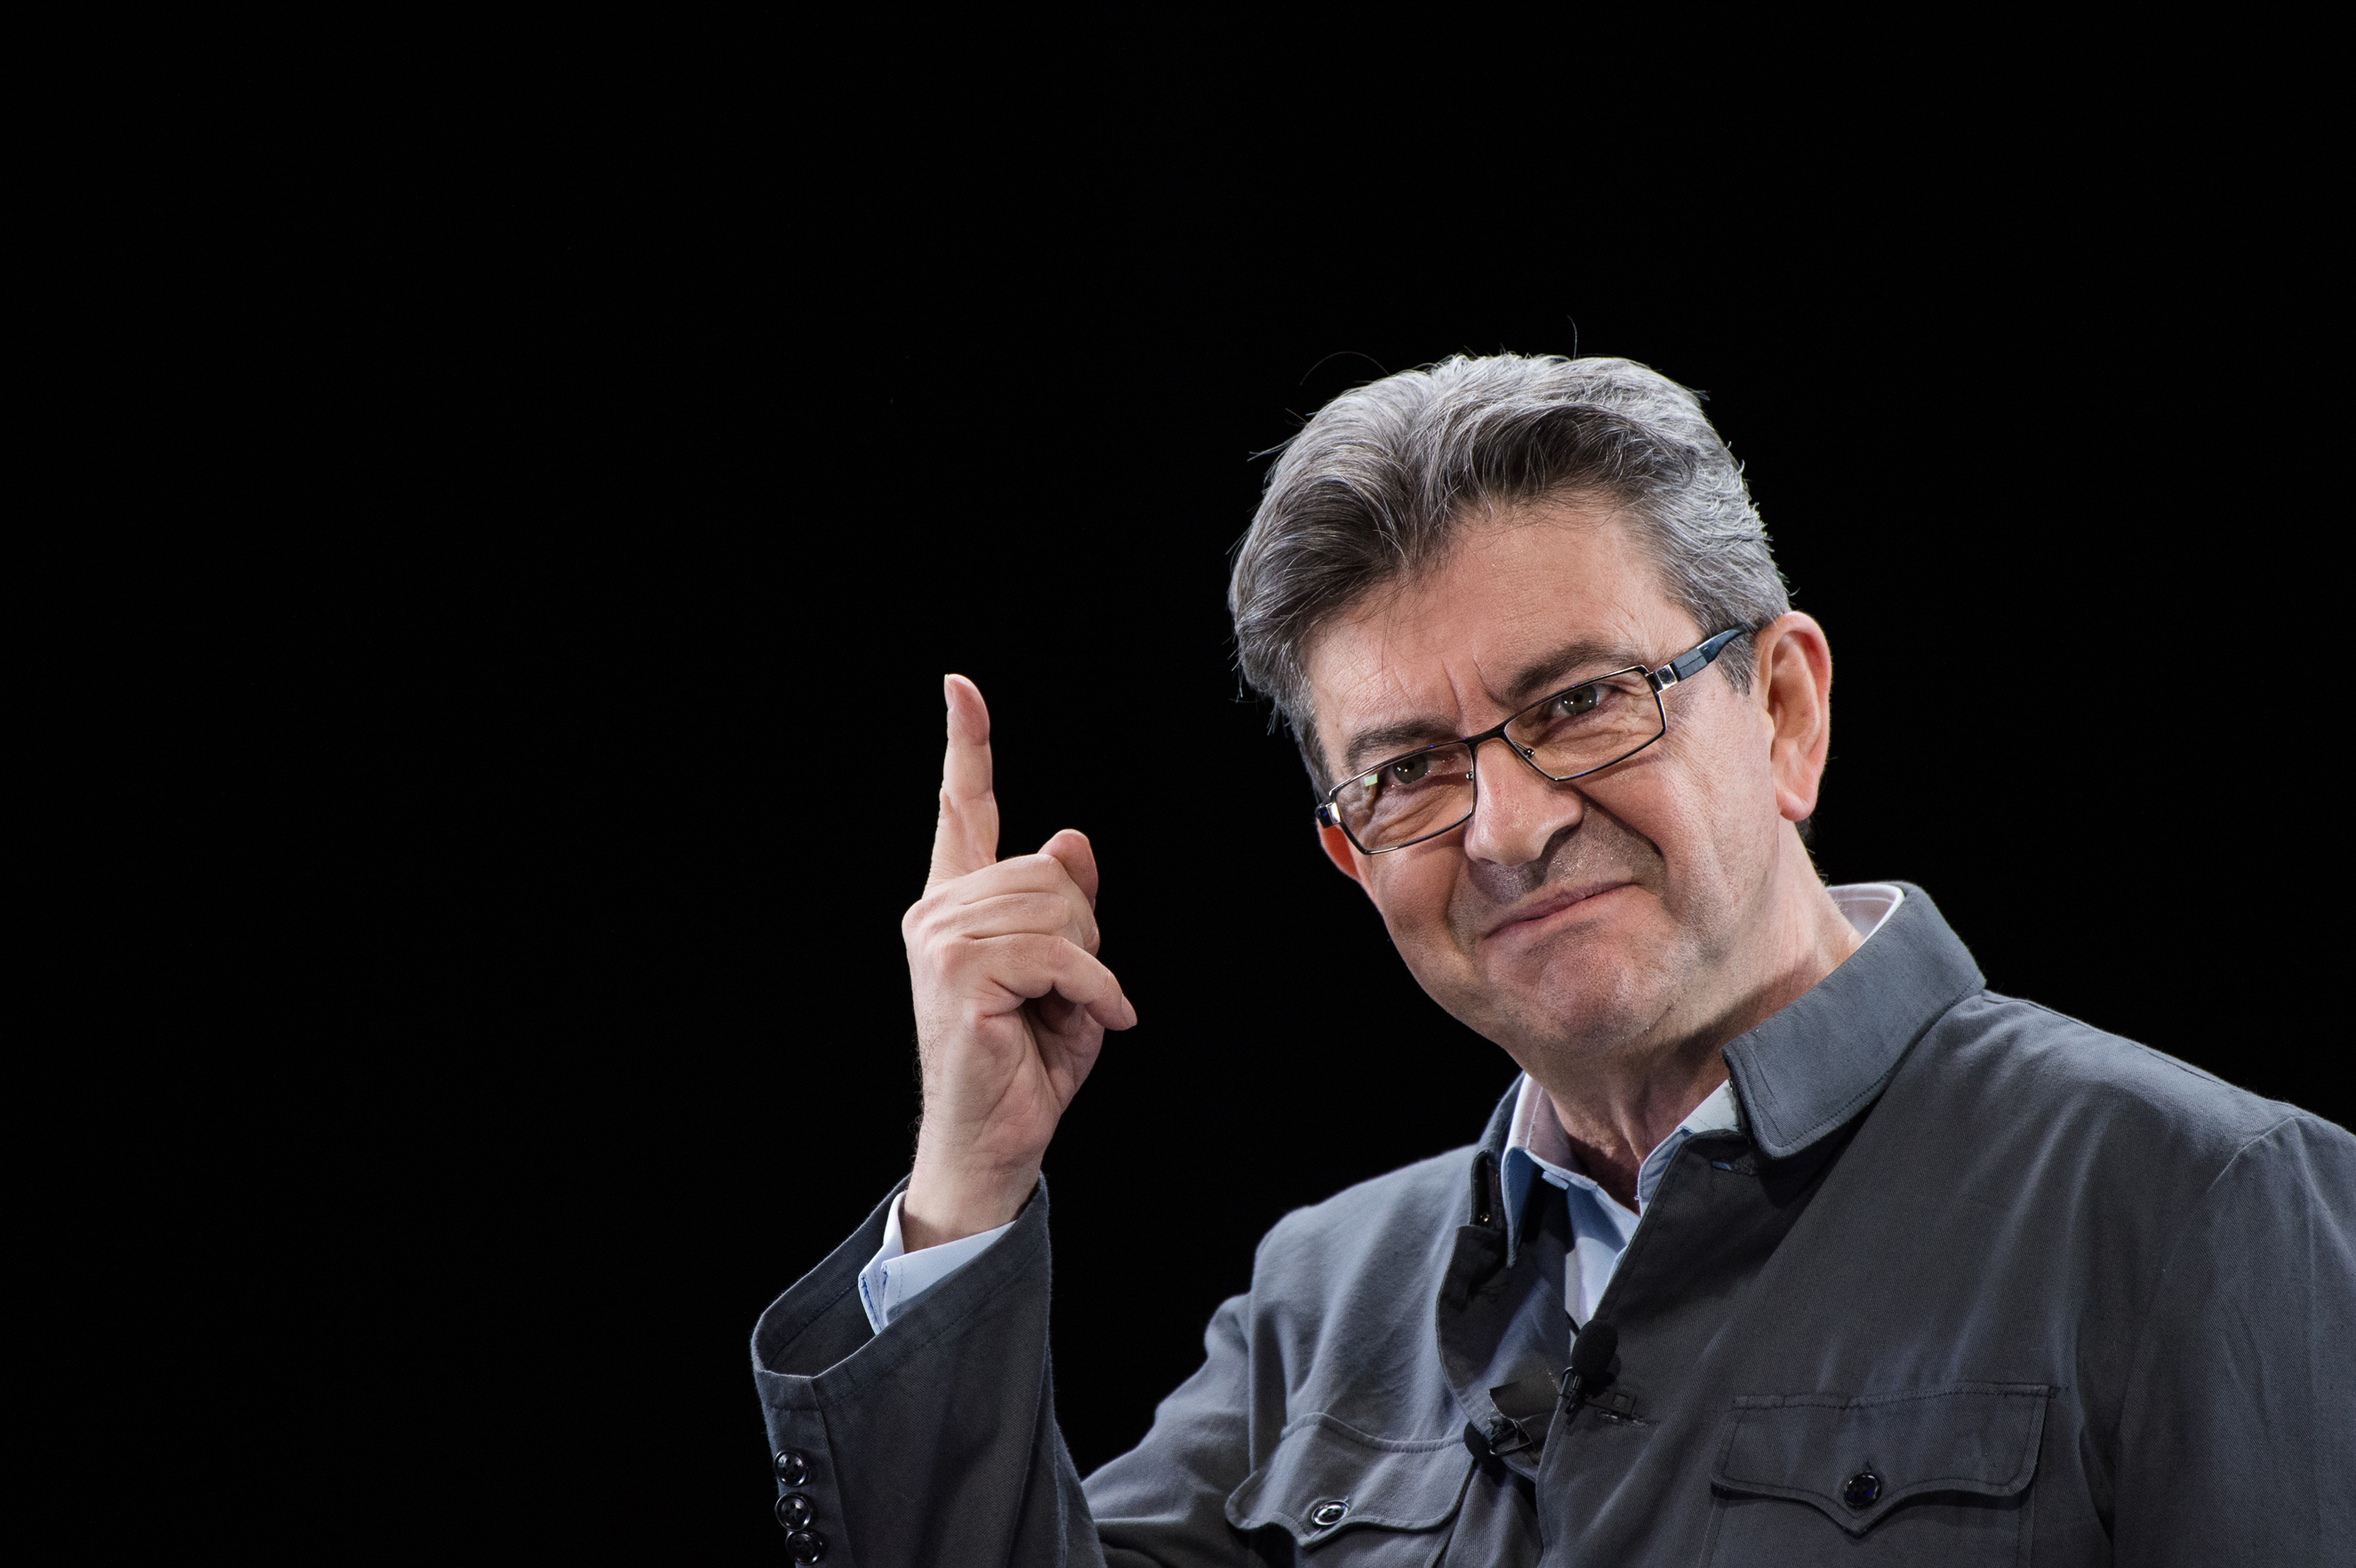 Founder of the left wing movement 'La France Insoumise' and candidate for the 2017 French Presidential Election Jean Luc Melenchon delivers a speech during his meeting on February 5, 2017 in Lyon, France. (Clement Mahoudeau—IP3/Getty Images)